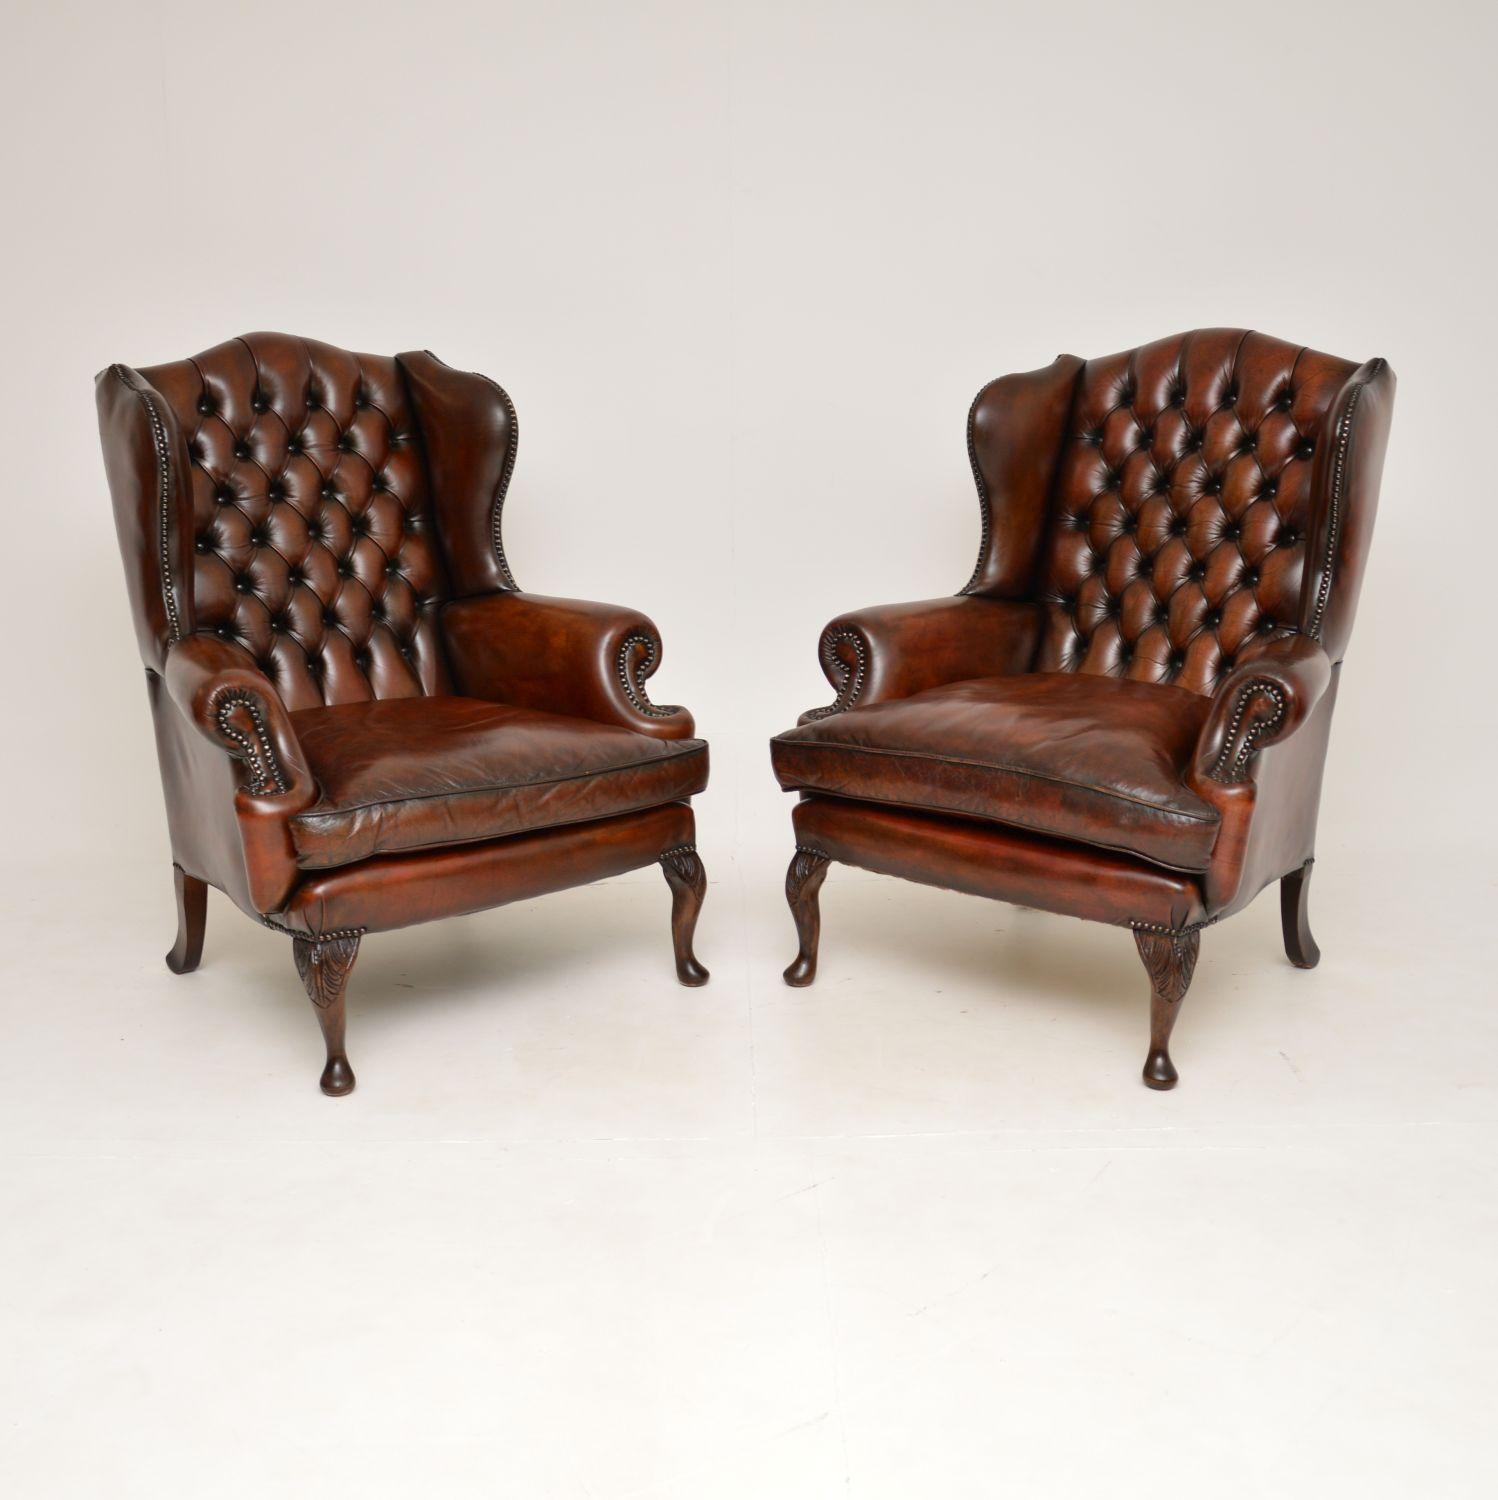 A fantastic pair of antique leather wing back armchairs. They were made in England, and date from around the 1930-50’s.

The quality is amazing, they have deep buttoned hump shaped backs, scroll over arms and sit on solid wood cabriole legs. The